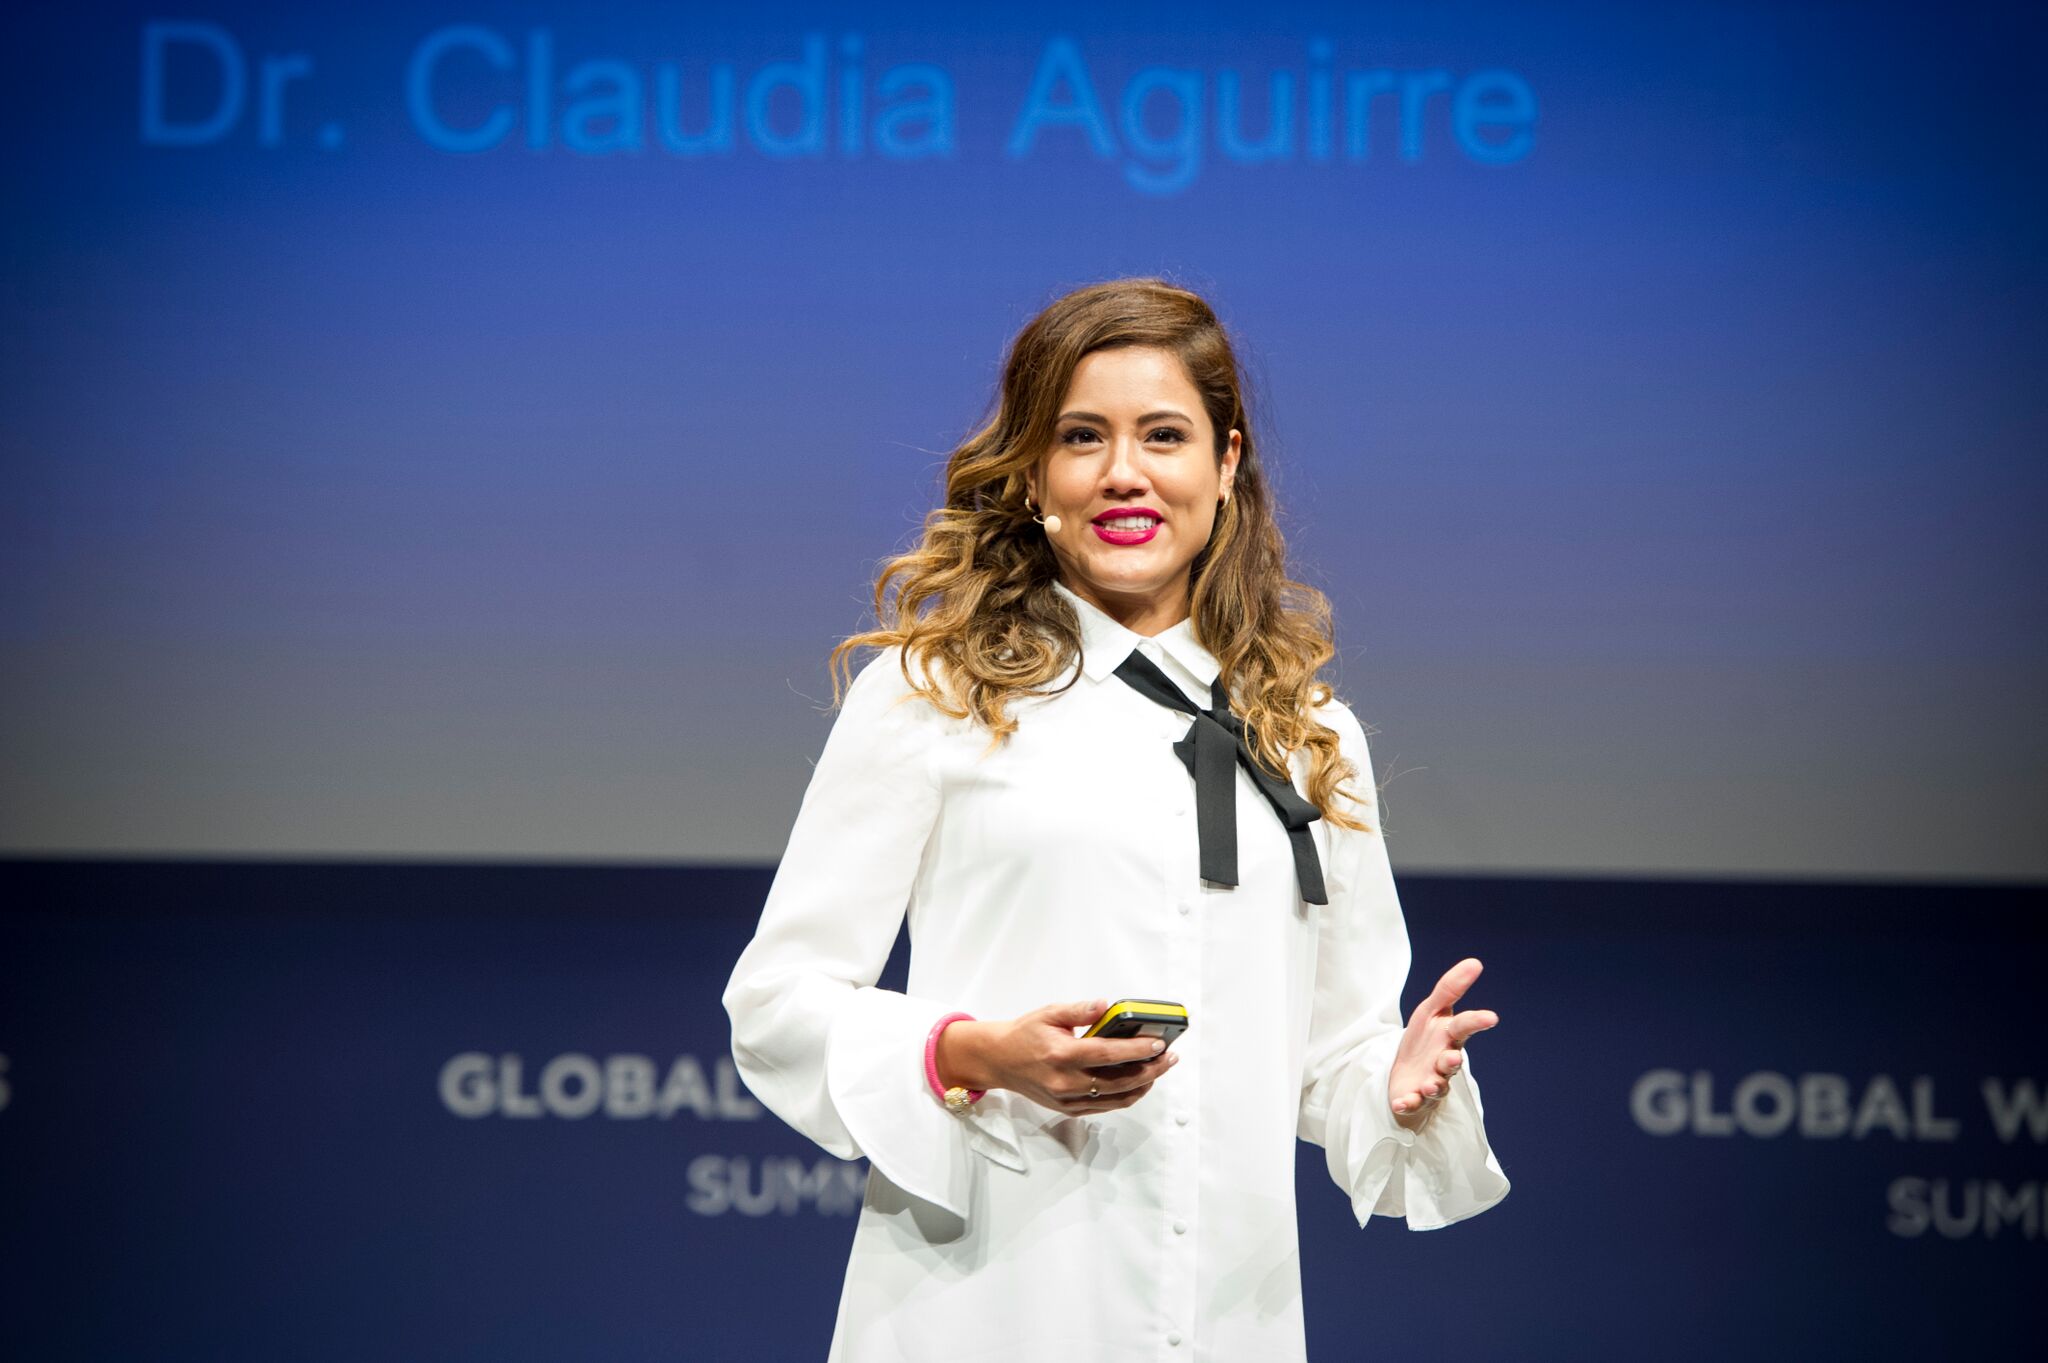 Claudia Aguirre, Author at Global Wellness Summit